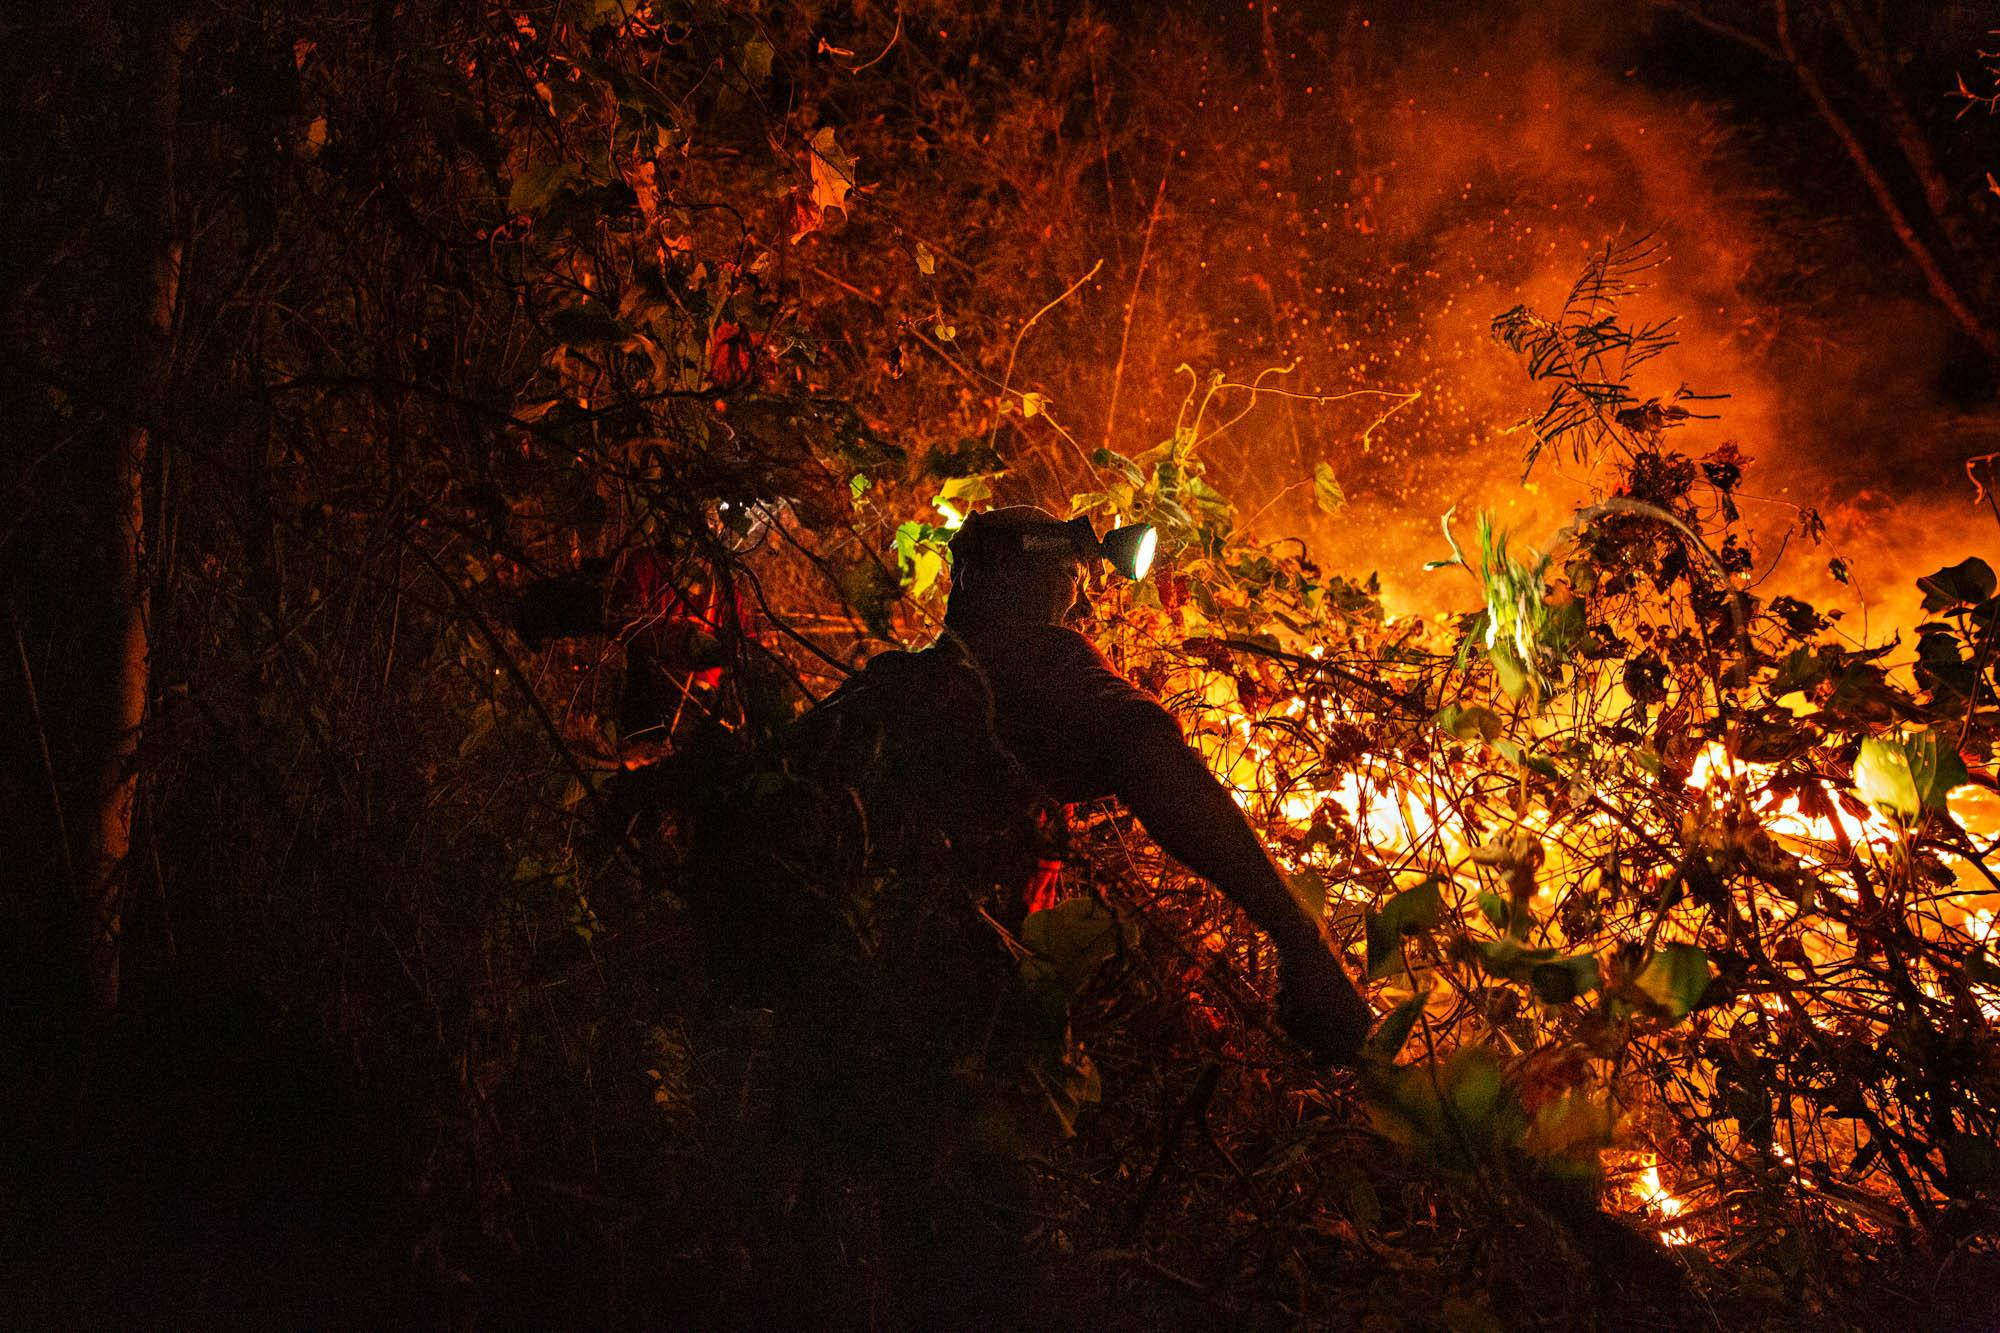 A fire fighter from Doi Mae Salong fire station works to put out a forest fire near Thai-Myanmar border. The part-time hires worked day and night to keep the blazes in check.&nbsp;